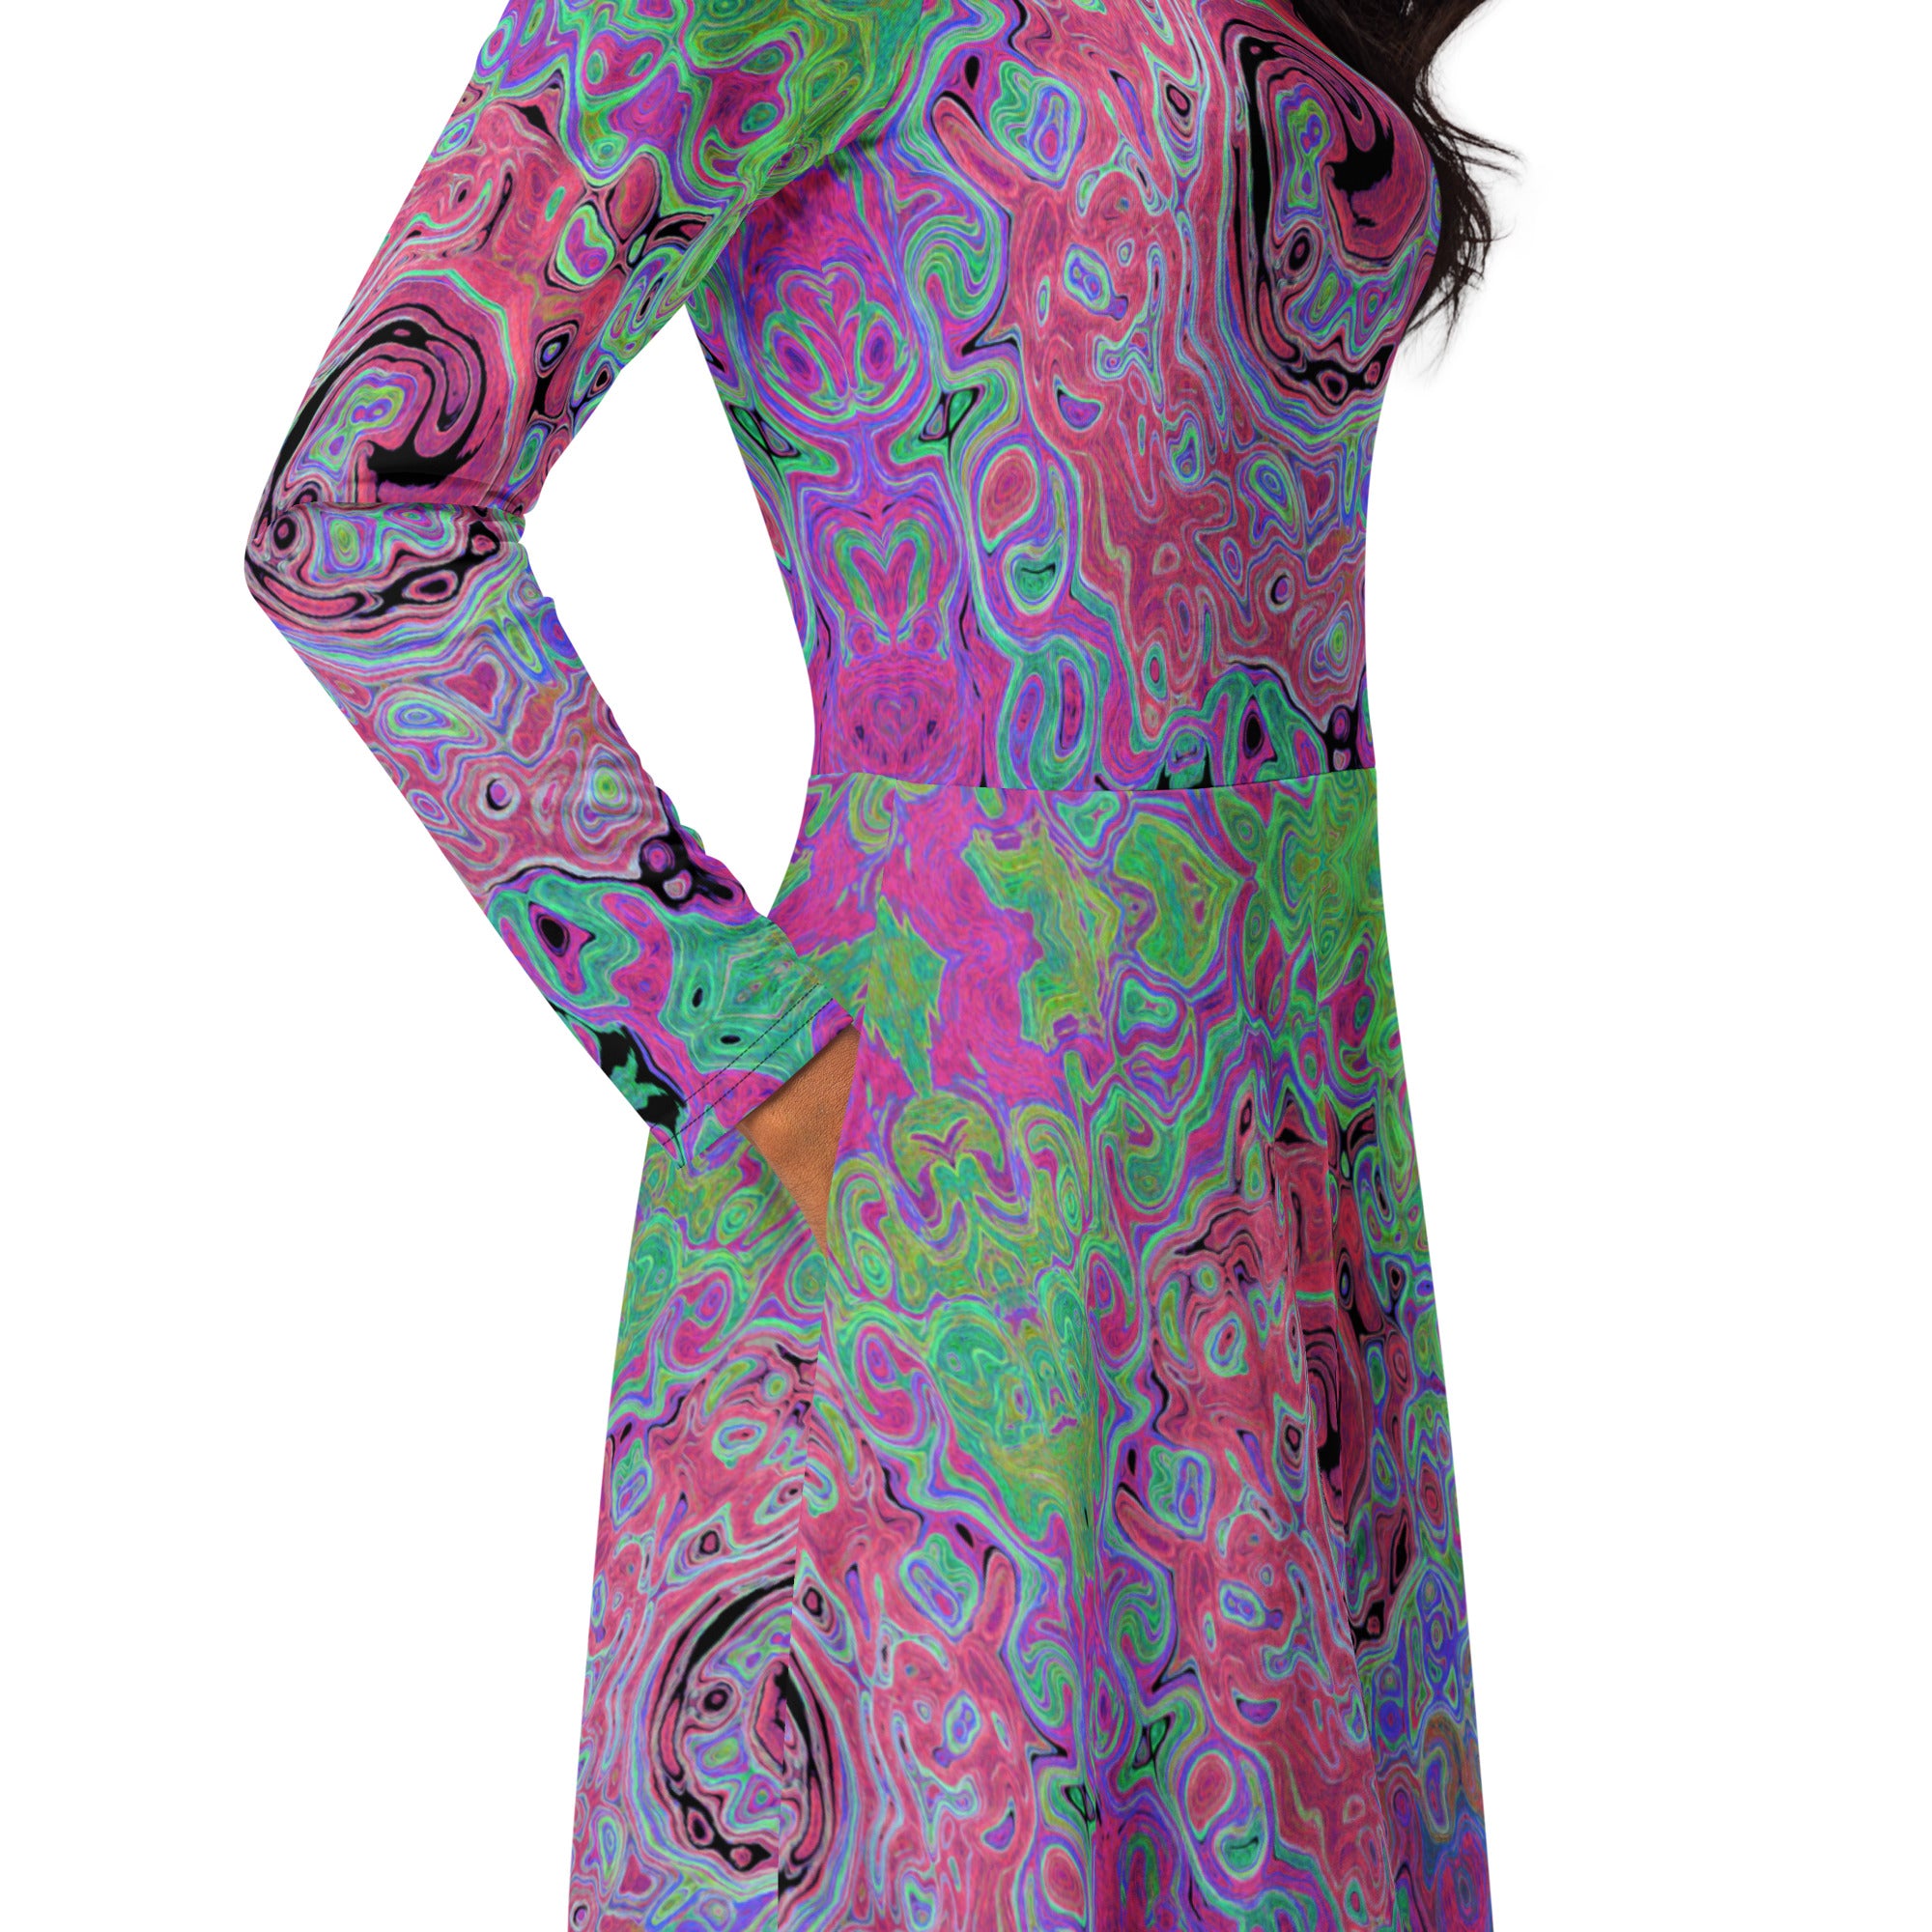 Midi Dress - Pink and Lime Green Groovy Abstract Retro Swirl